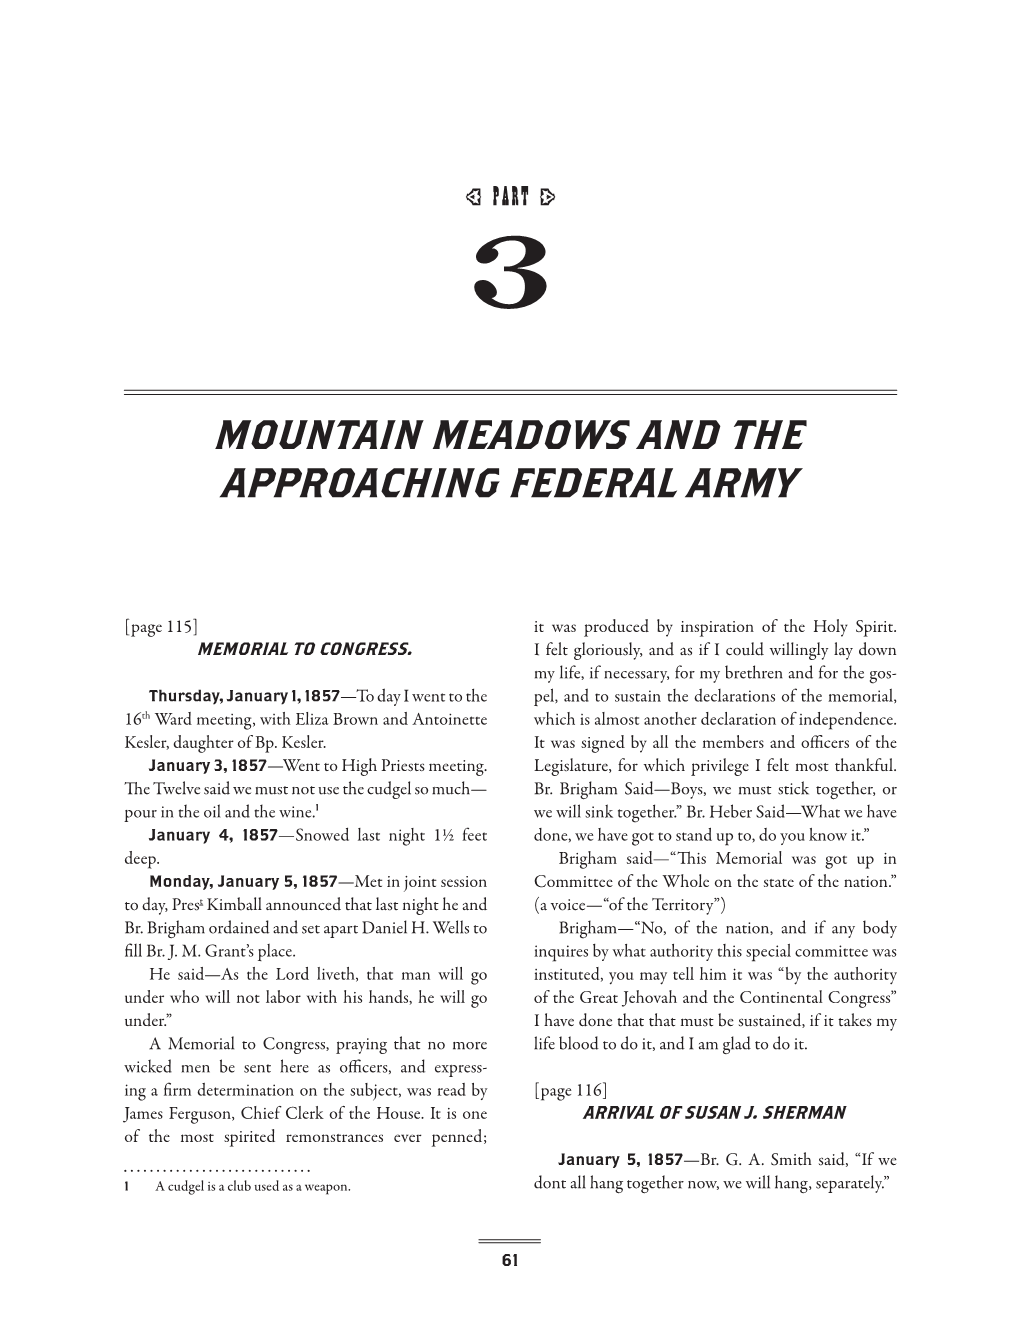 Mountain Meadows and the Approaching Federal Army